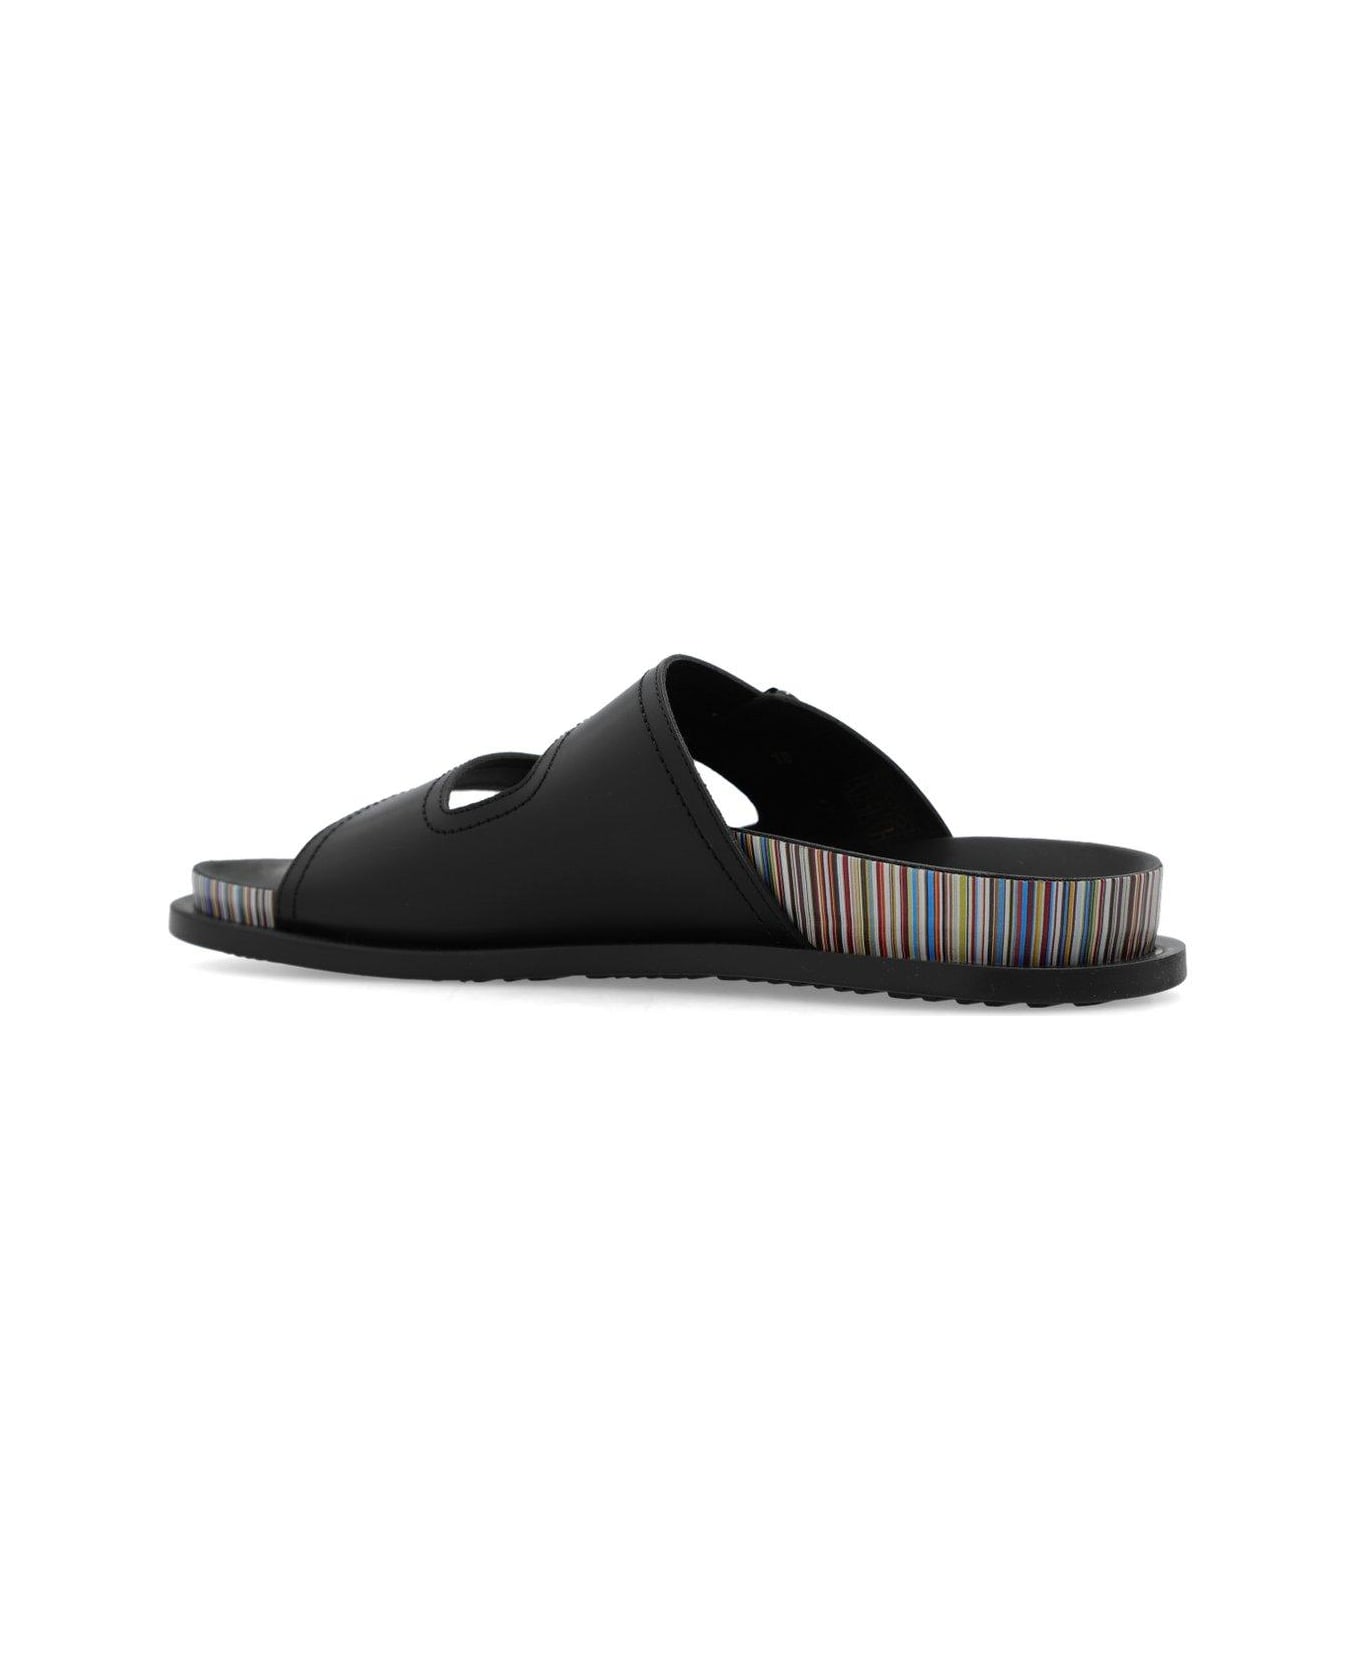 Paul Smith Leather Slides - Black その他各種シューズ